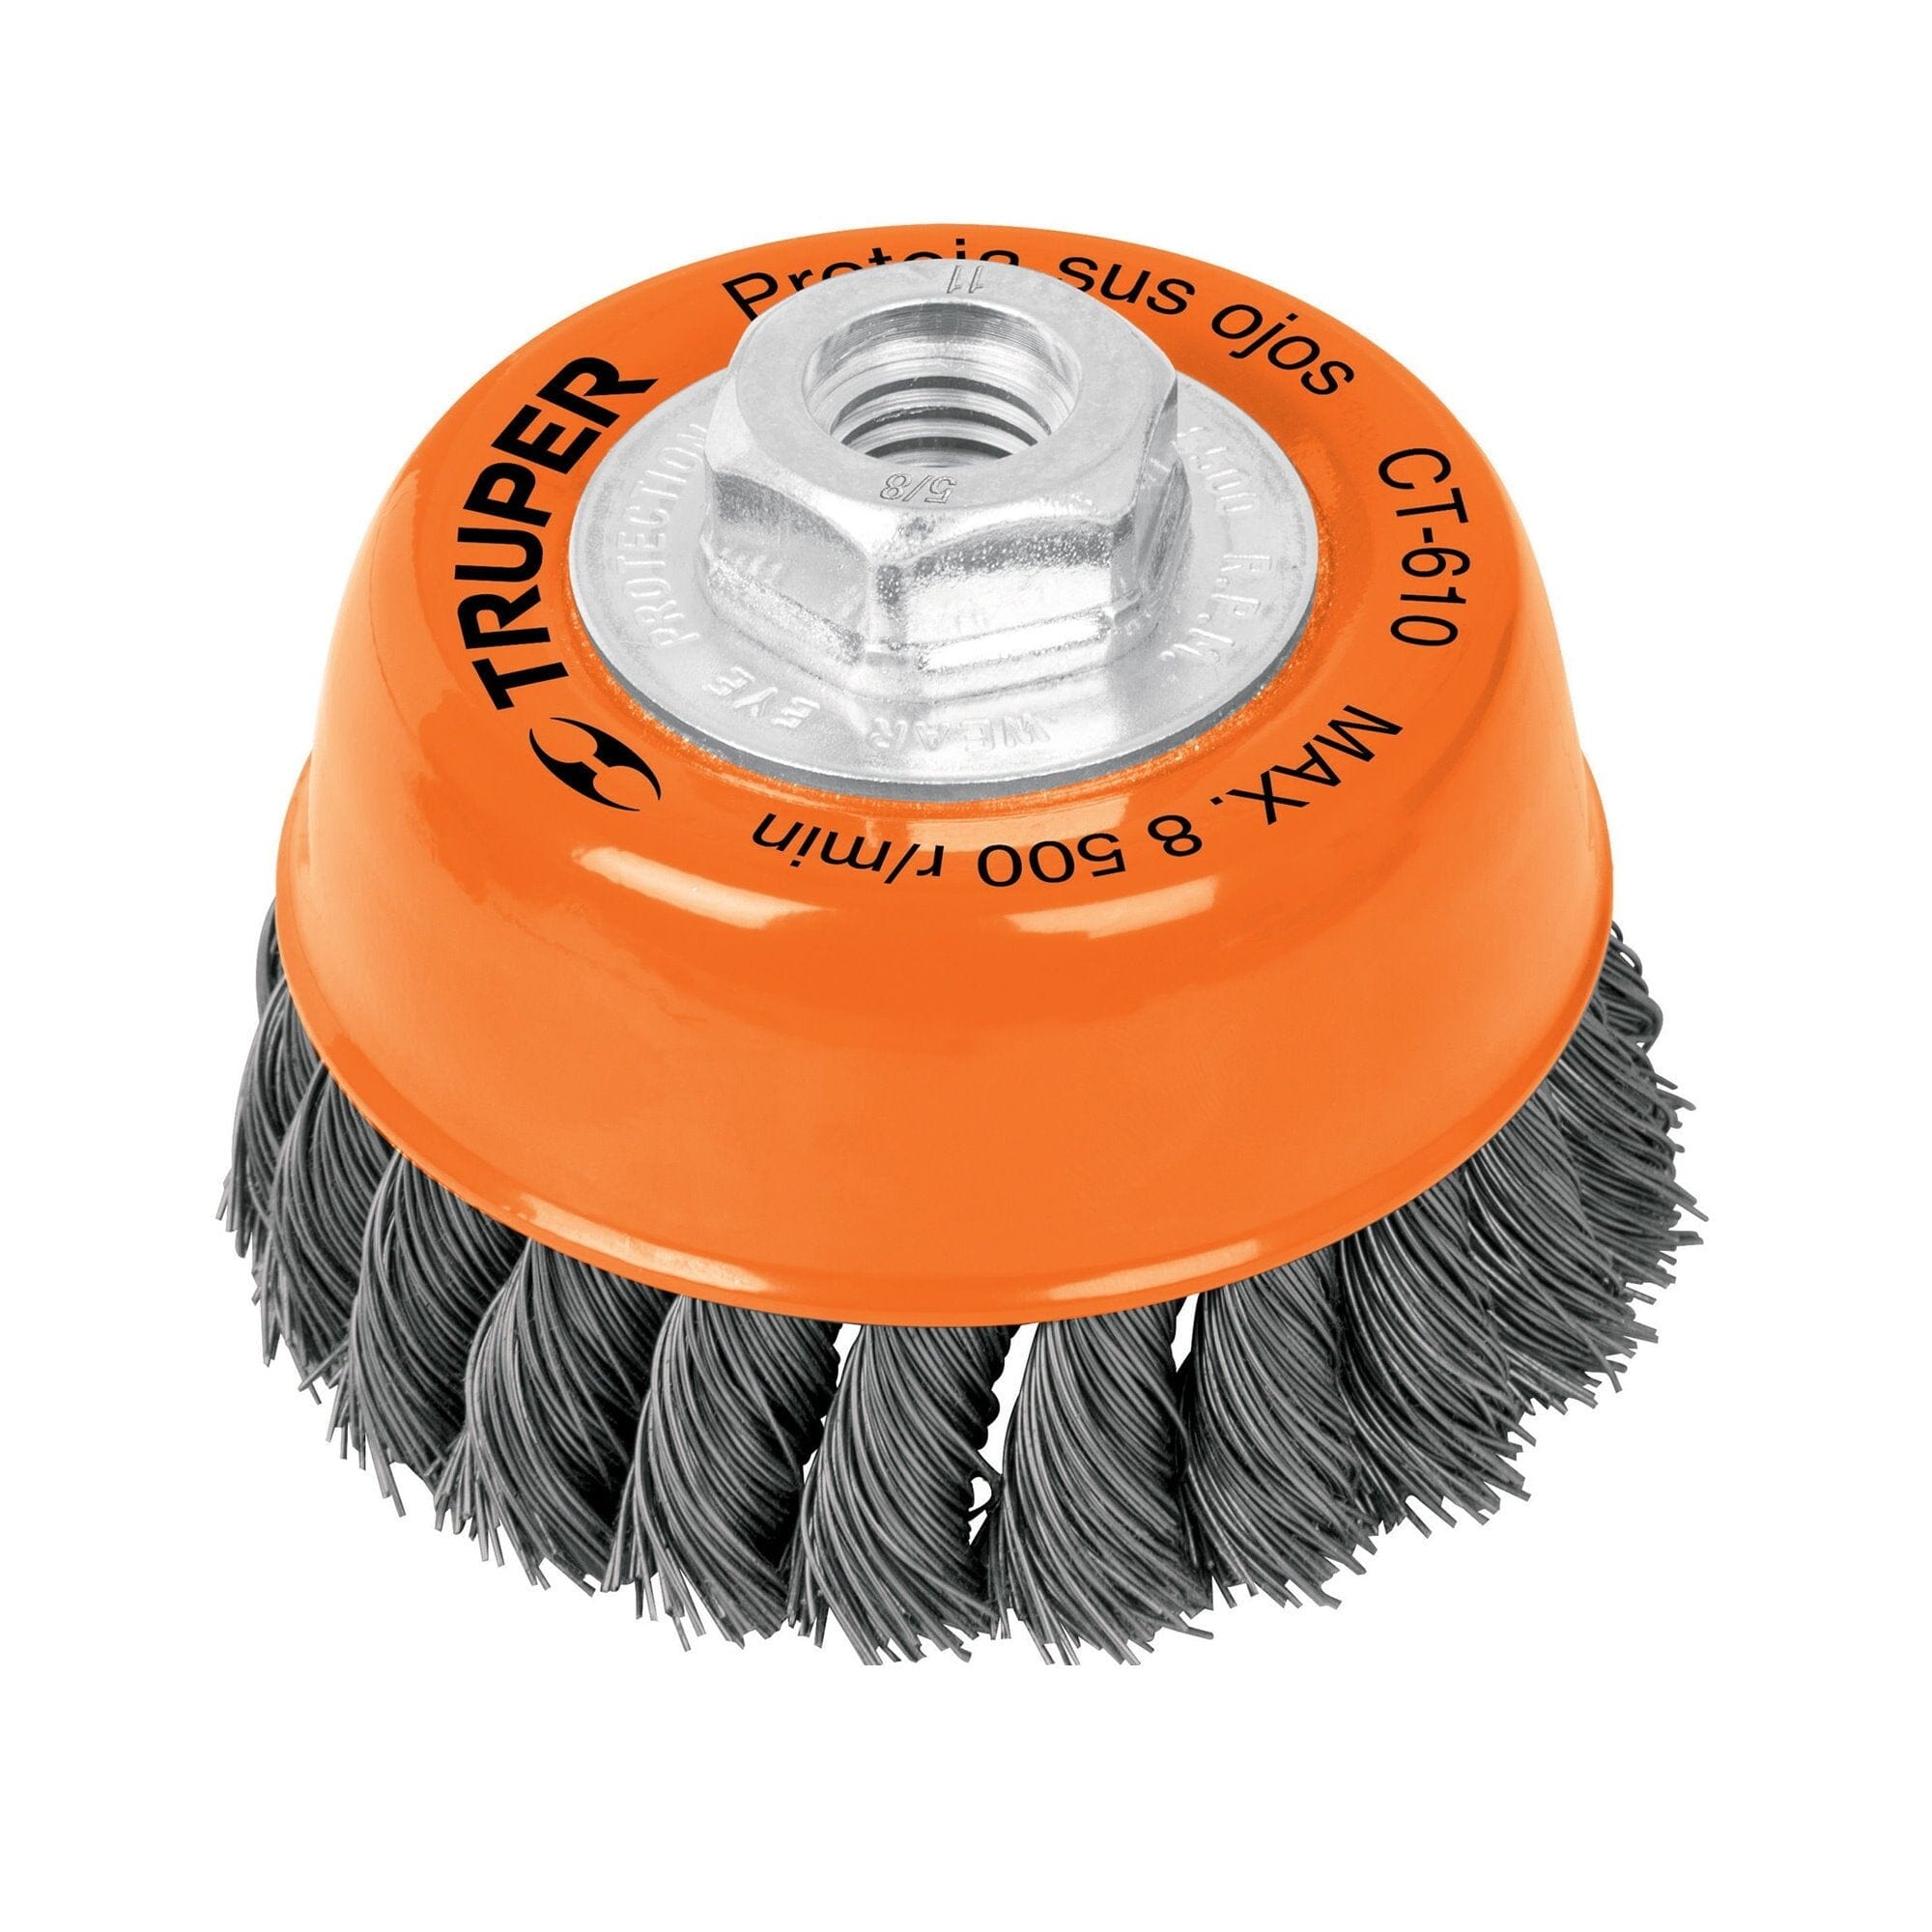 Truper Wire Cup Brush Twisted with 14mm Nut 100mm